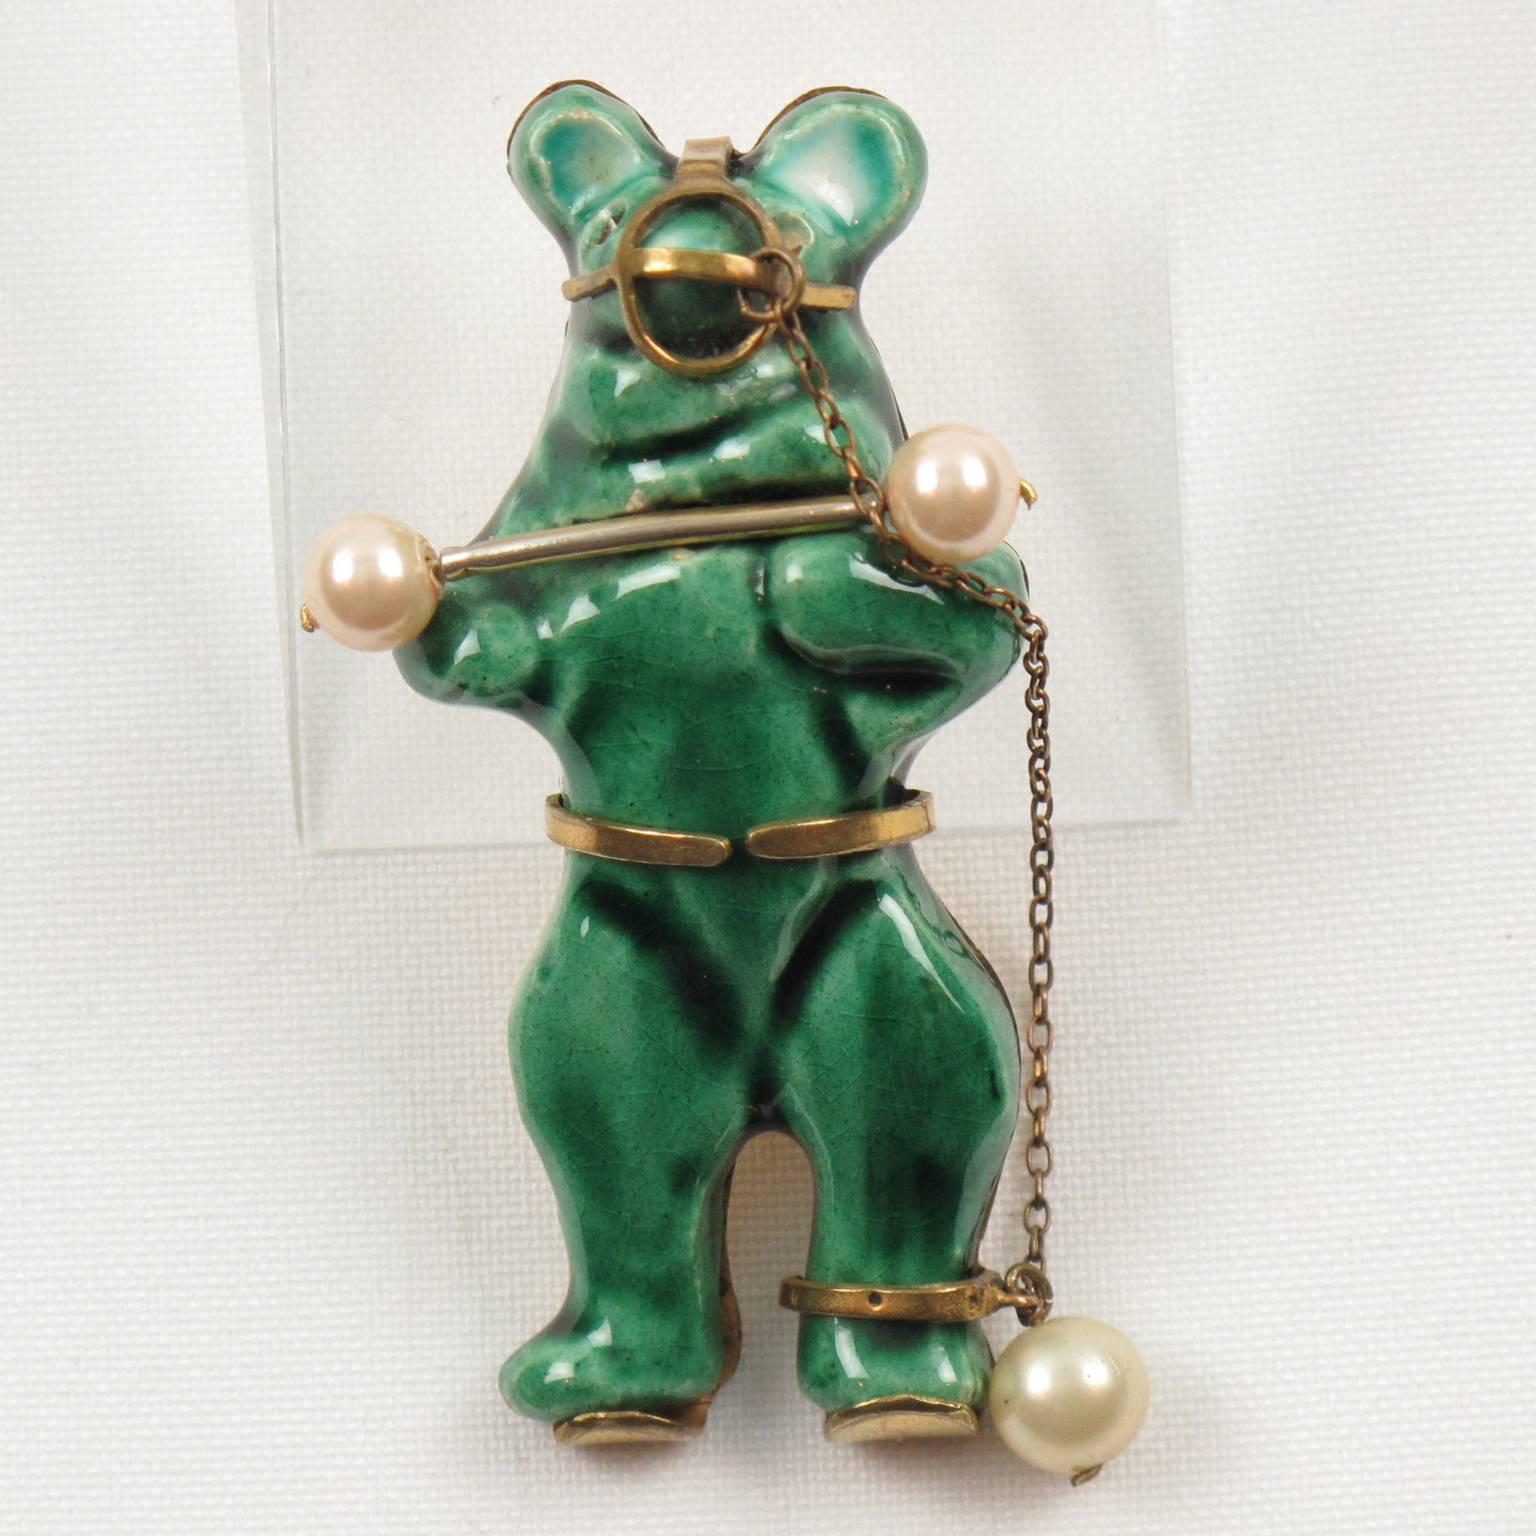 Extremely rare vintage green glazed ceramic or terracotta bear pin brooch designed by Lucien Neuquelman (1909 - 1988) for Elsa Schiaparelli (1890 - 1973). 
In 1938, Elsa Schiaparelli was the first to give a theme to her collections from the early